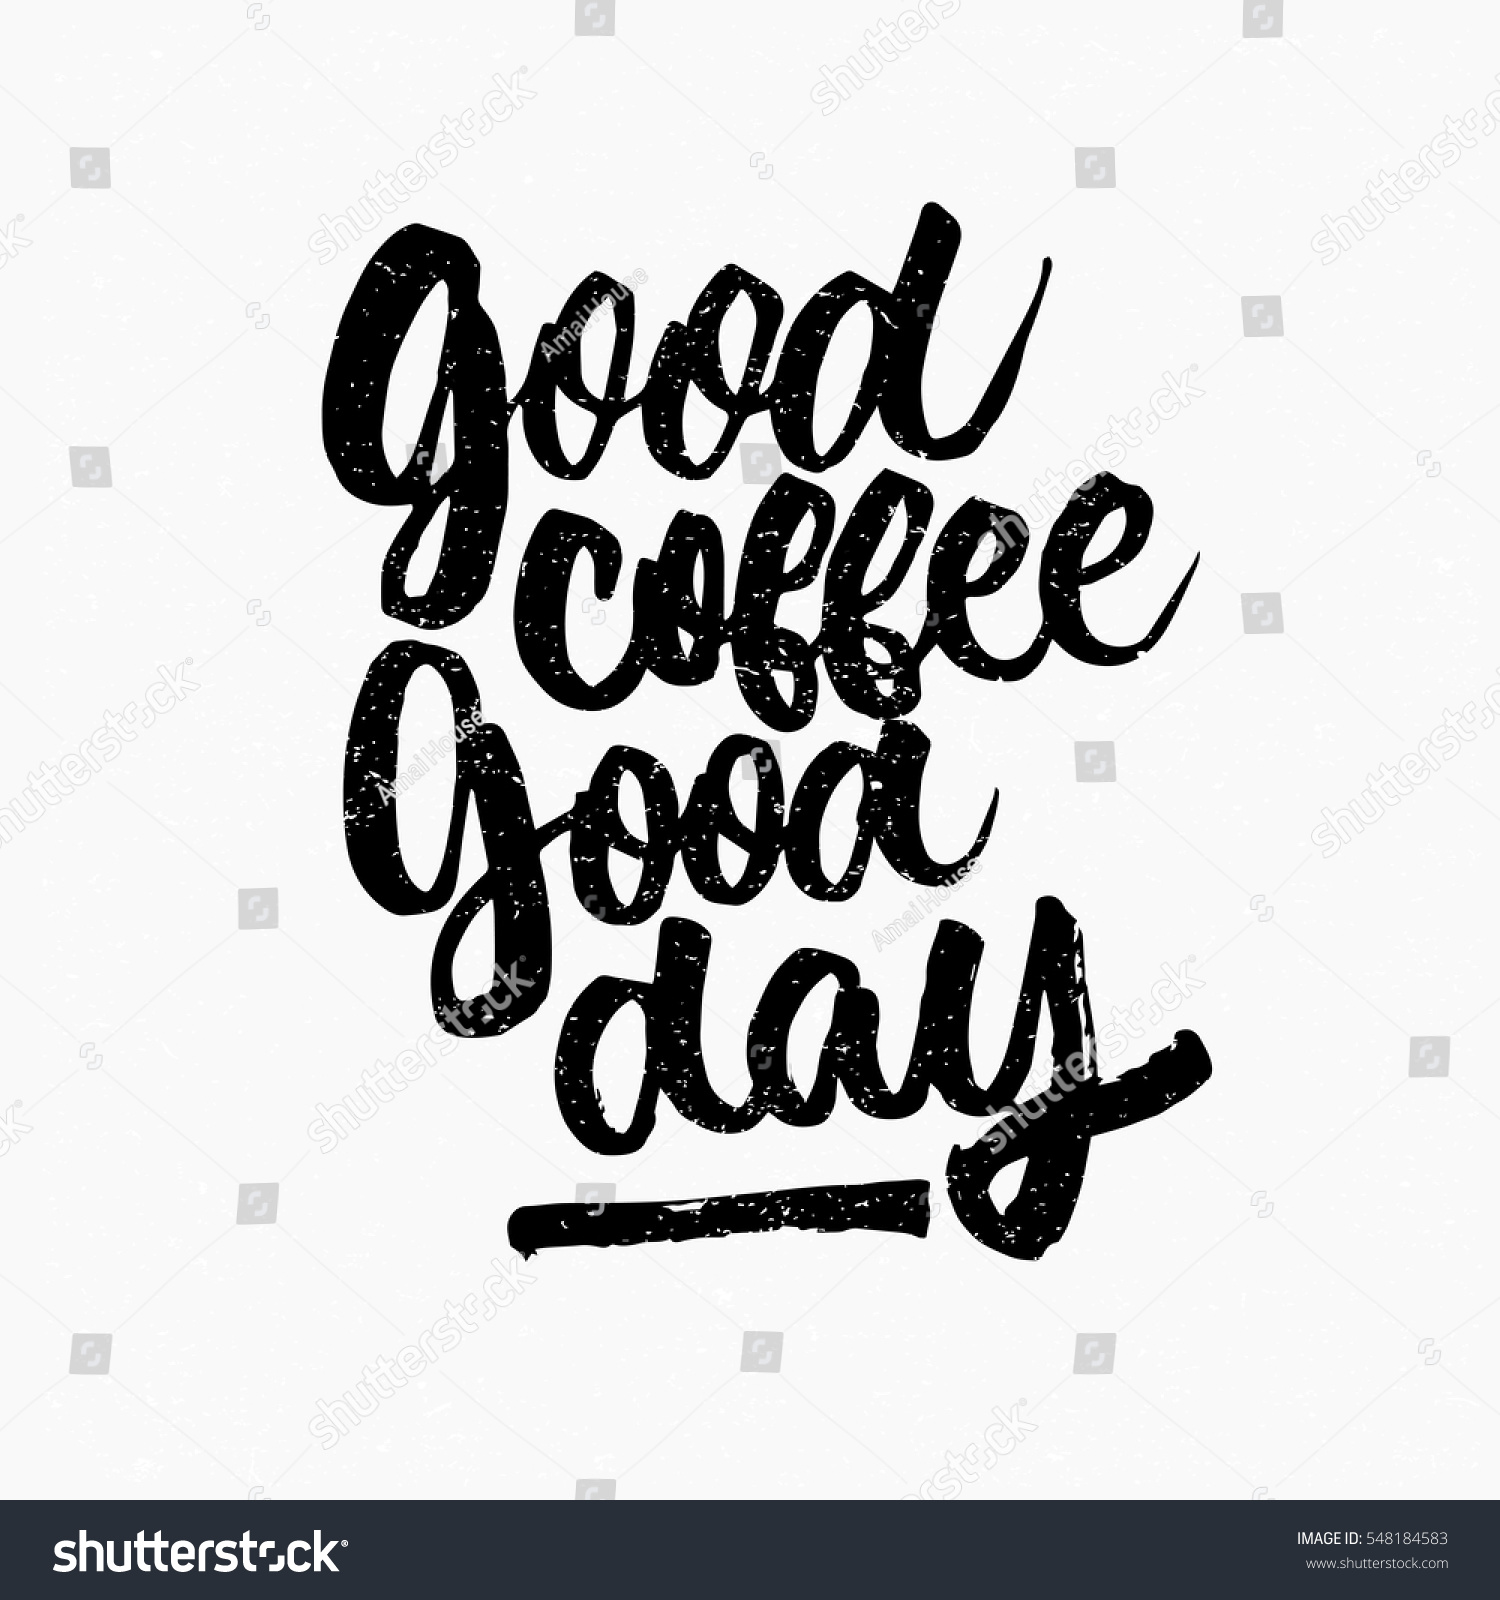 Good Coffee Good Day Quote Ink Stock Vector 548184583 - Shutterstock